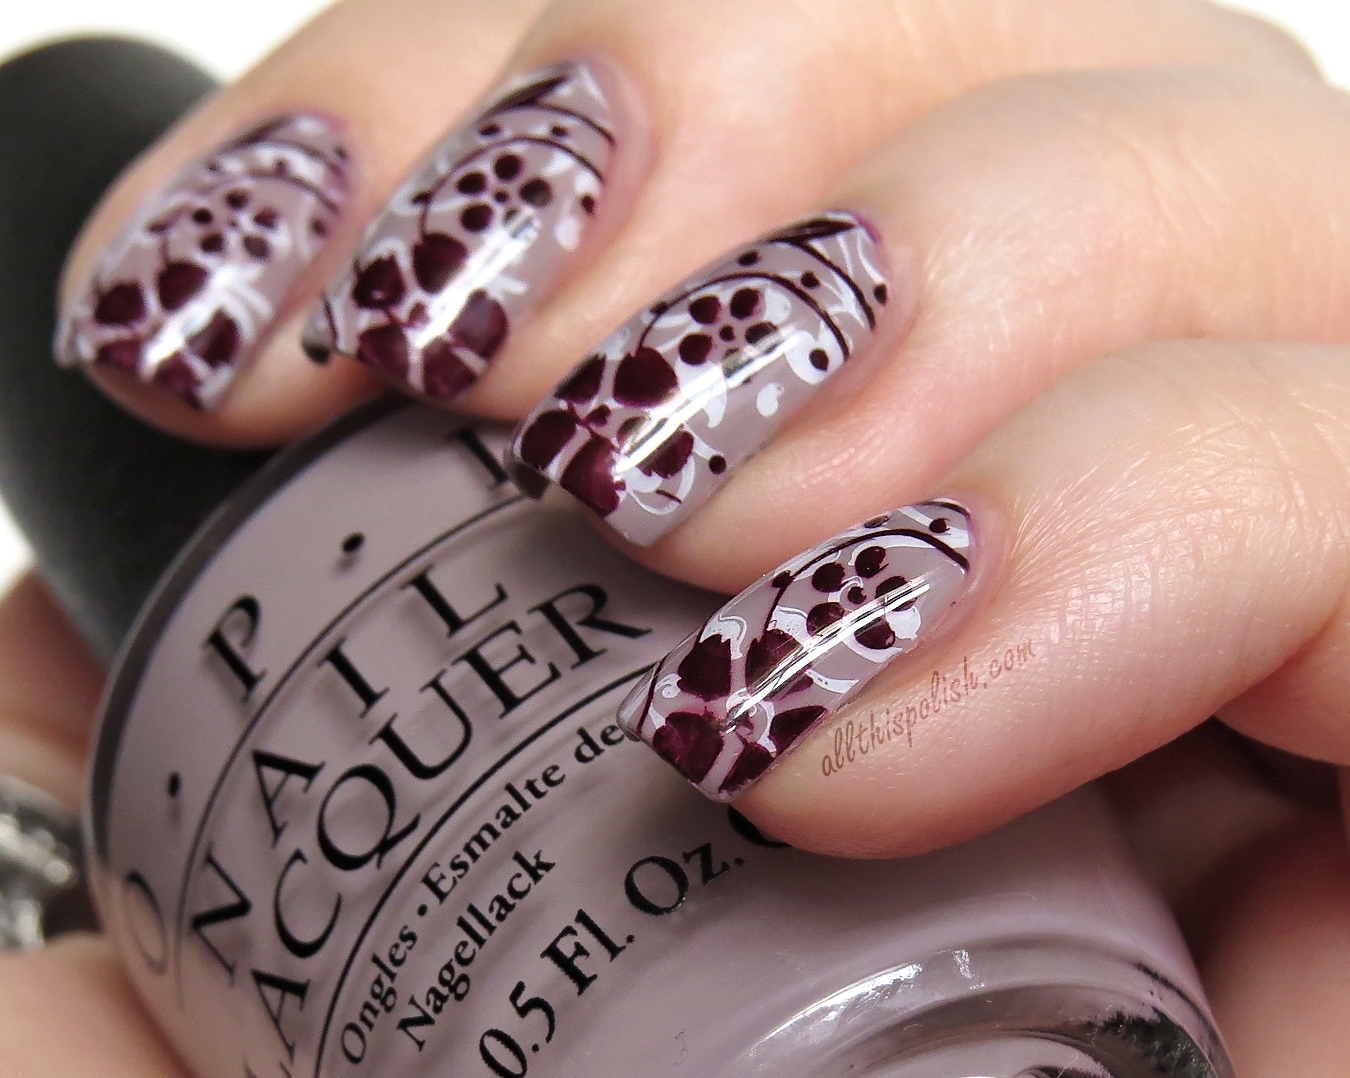 All This Polish: OPI Taupe-less Beach and Floral Double Stamping